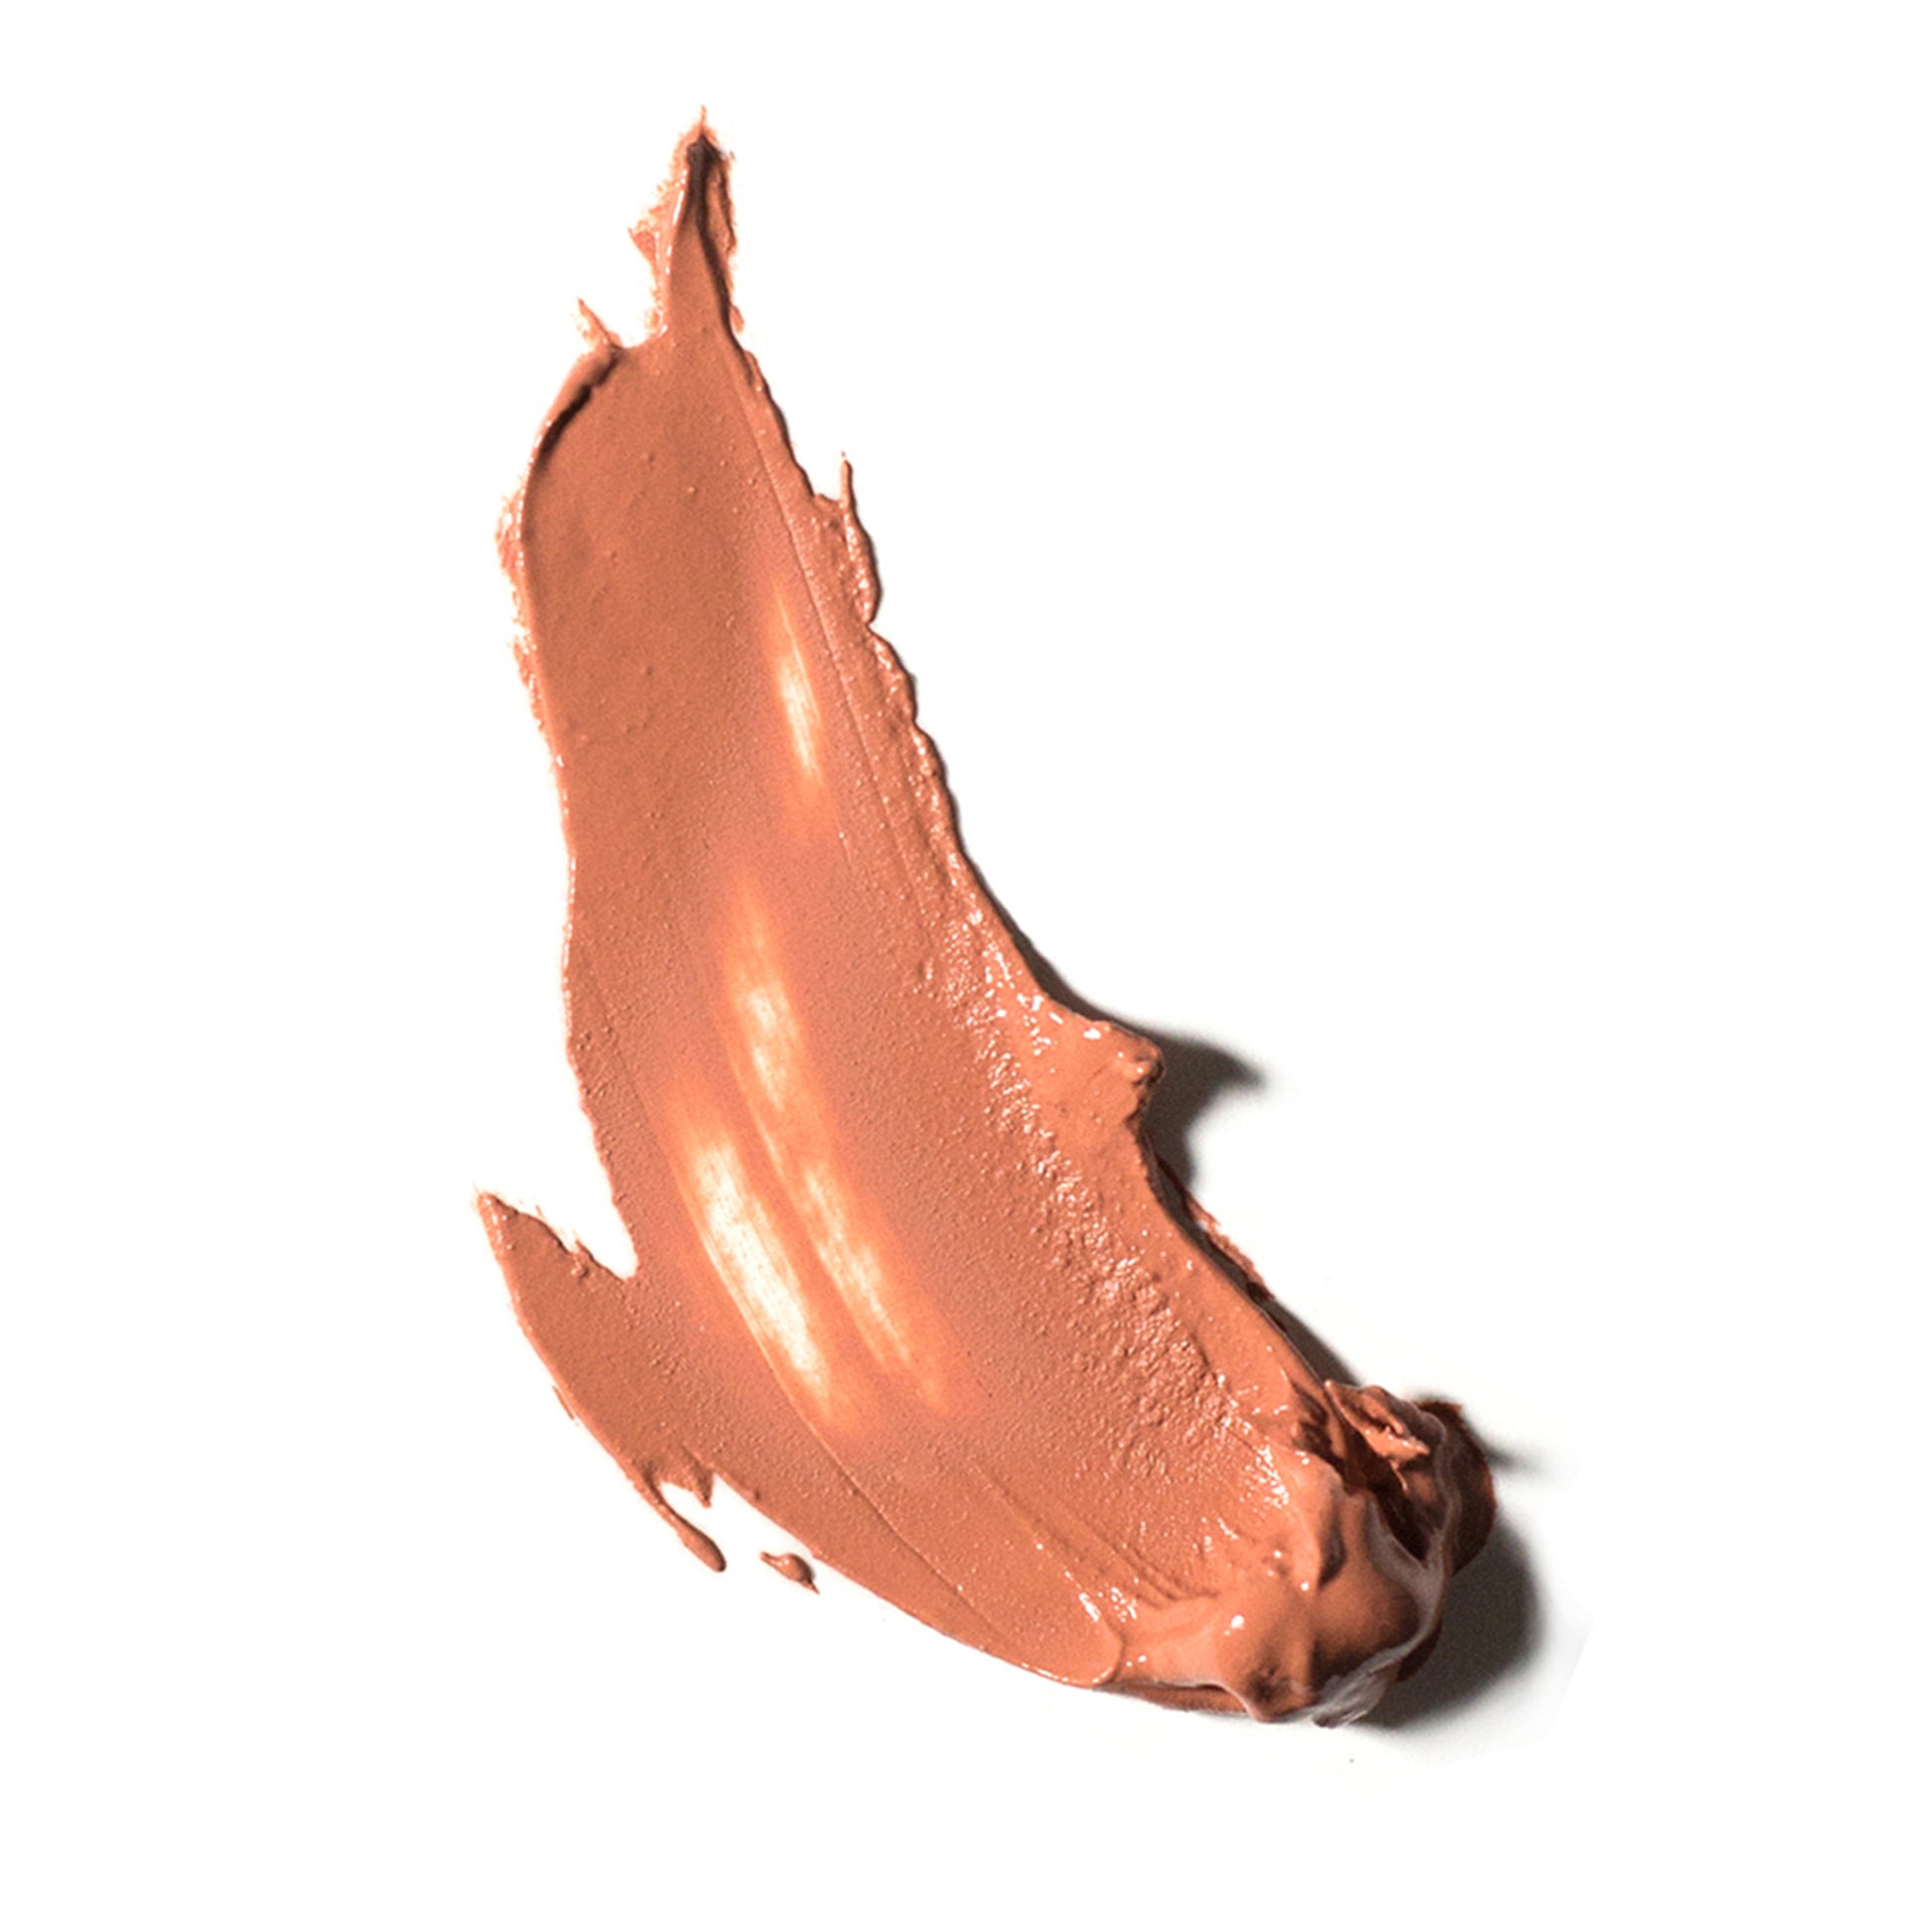 A swatch of the Ere Perez Carrot Colour Pot cream blush in Healthy, a soft peach shade. 